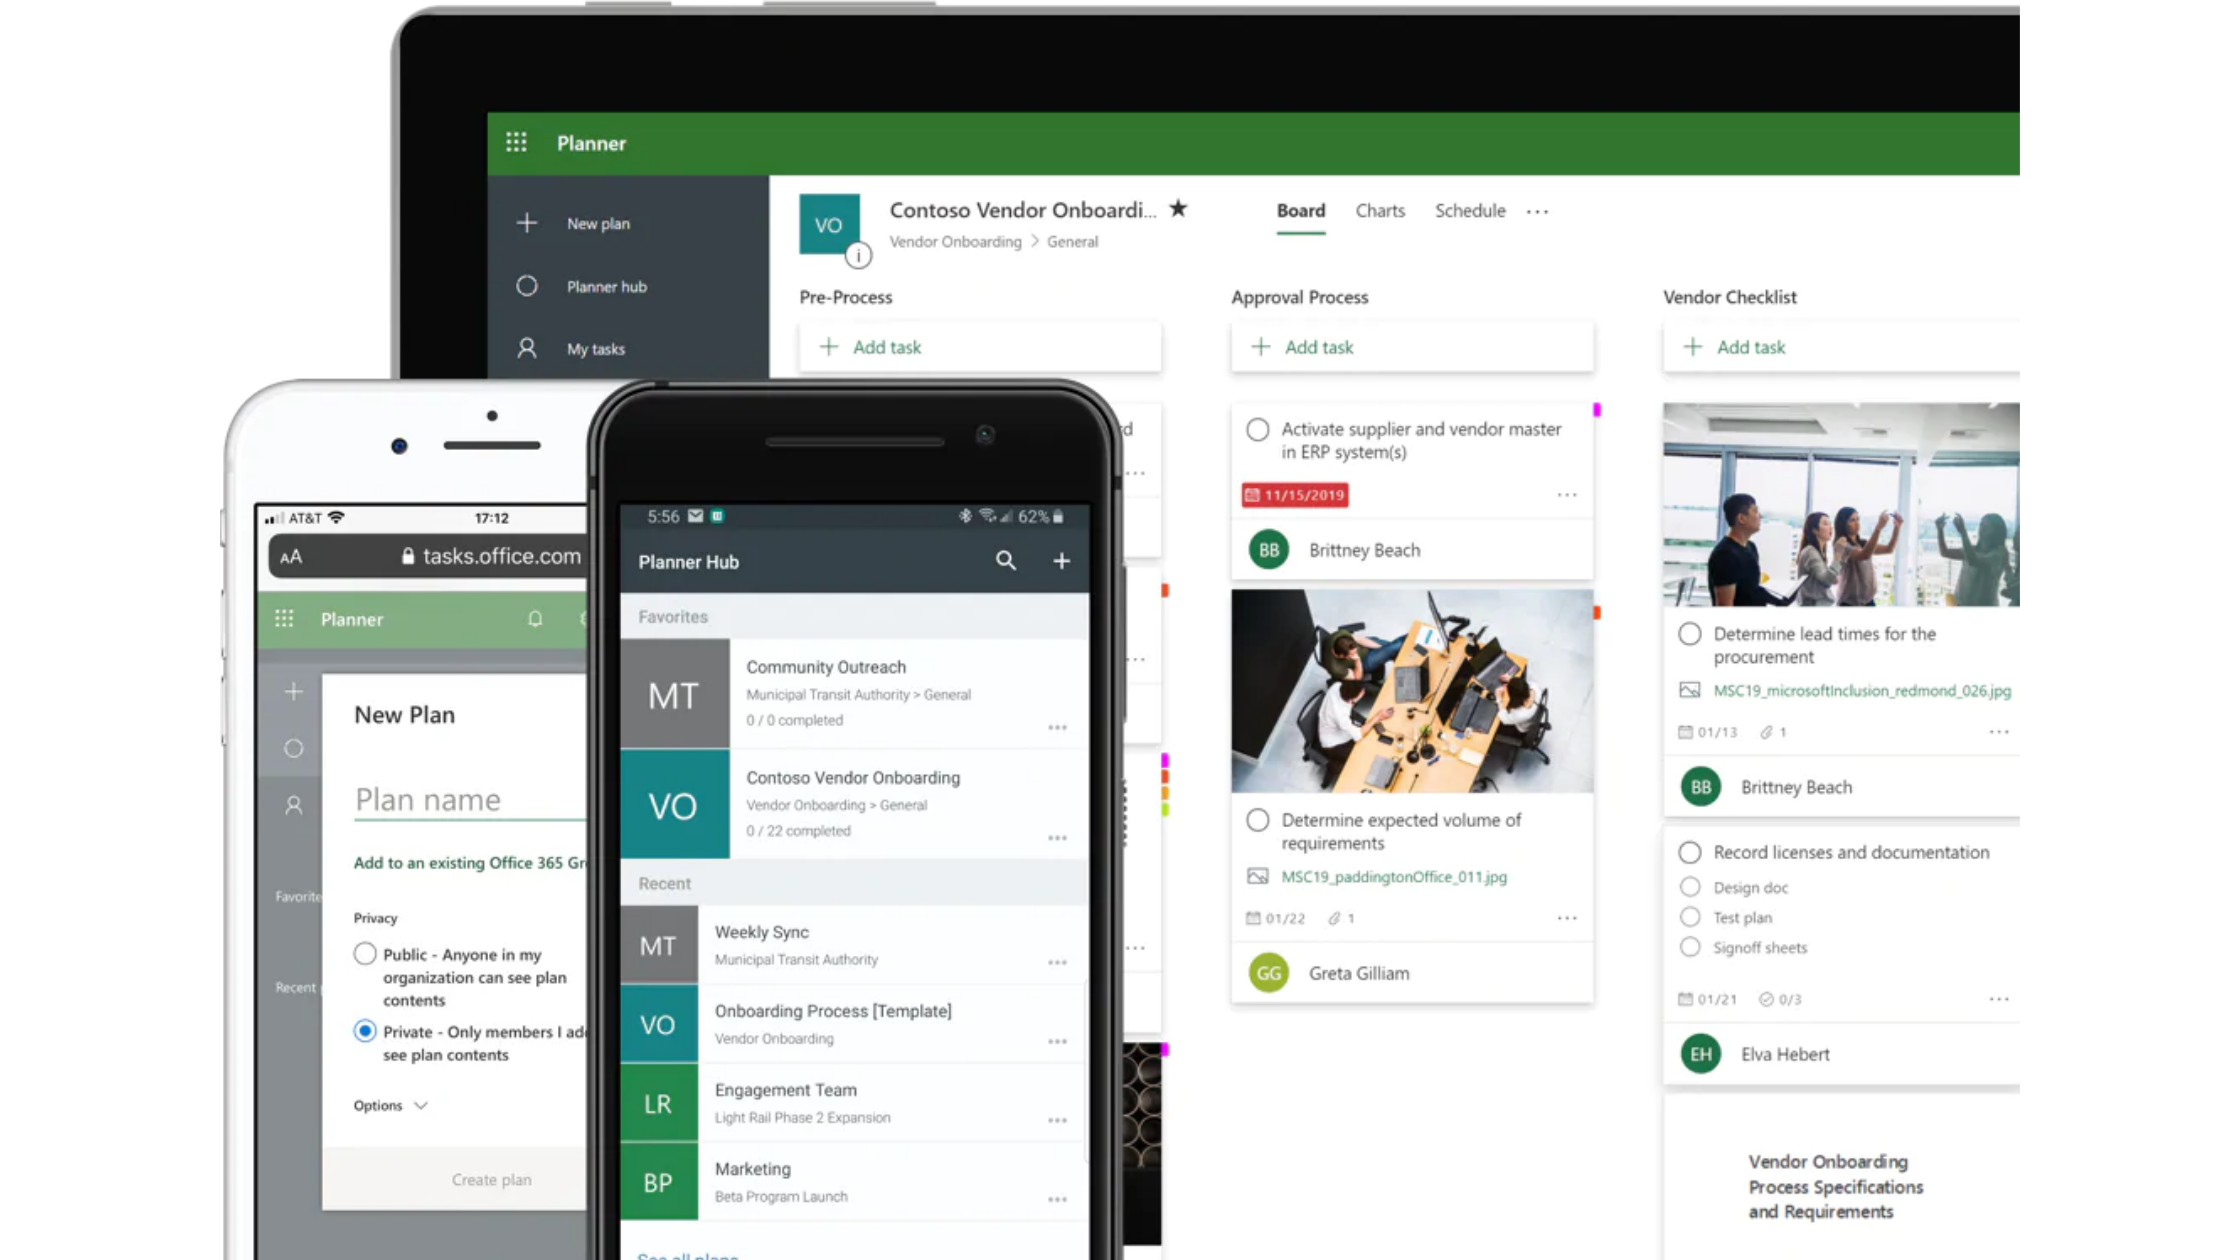 Microsoft-Planner-is-a-visual-organisation-app-for-collaborative-working-and-scheduling.-Learn-more-about-this-simple-yet-powerful-365-Business-tool